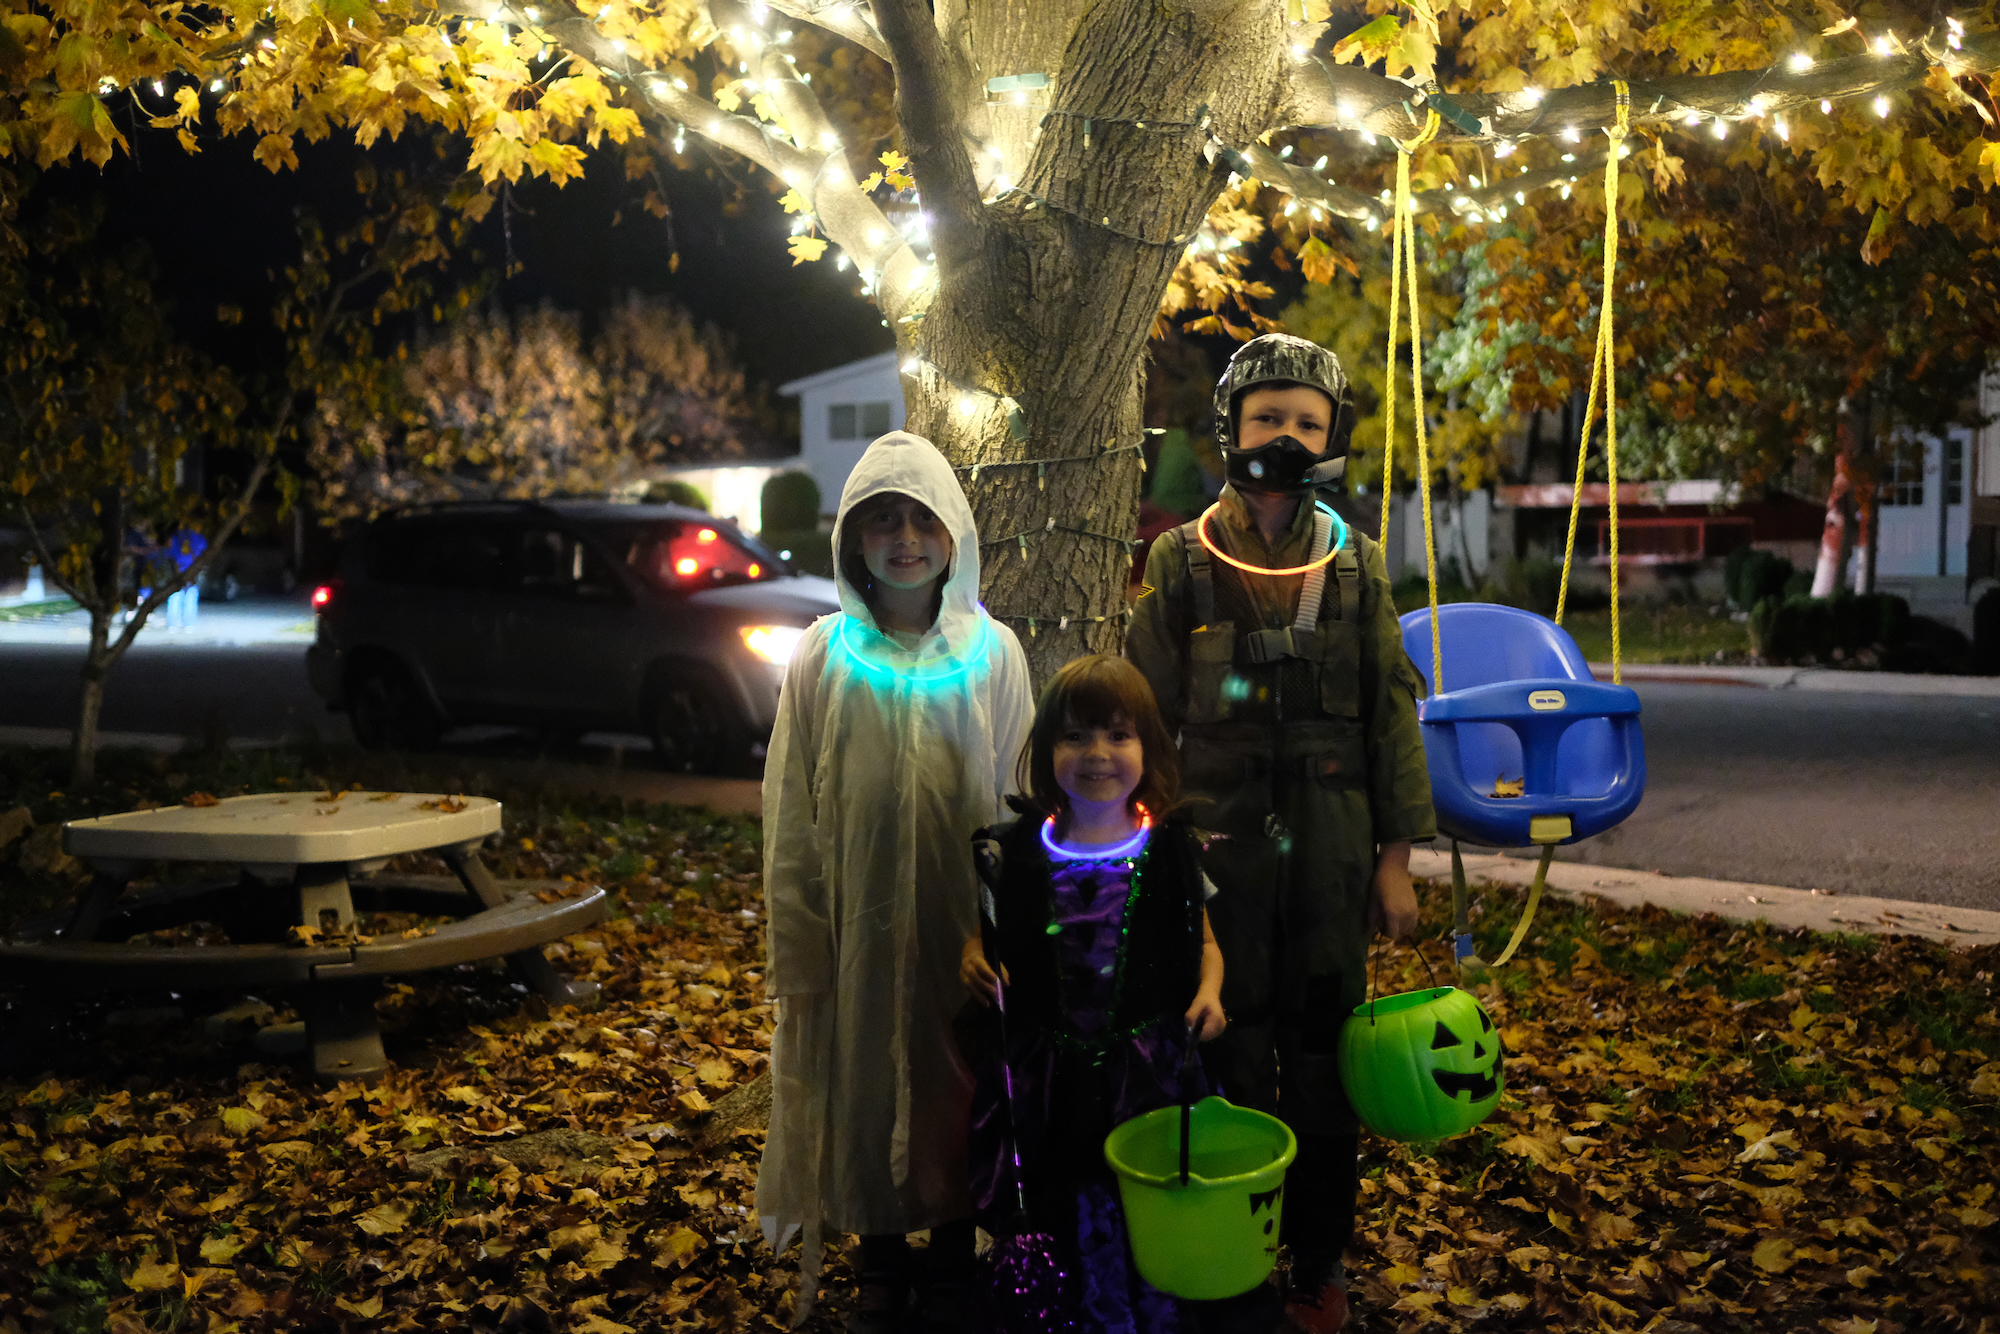 Elle in a Ghost Costume, Emily as a witch, and Emmett in a Pilots costume standing under a lit tree on Halloween.